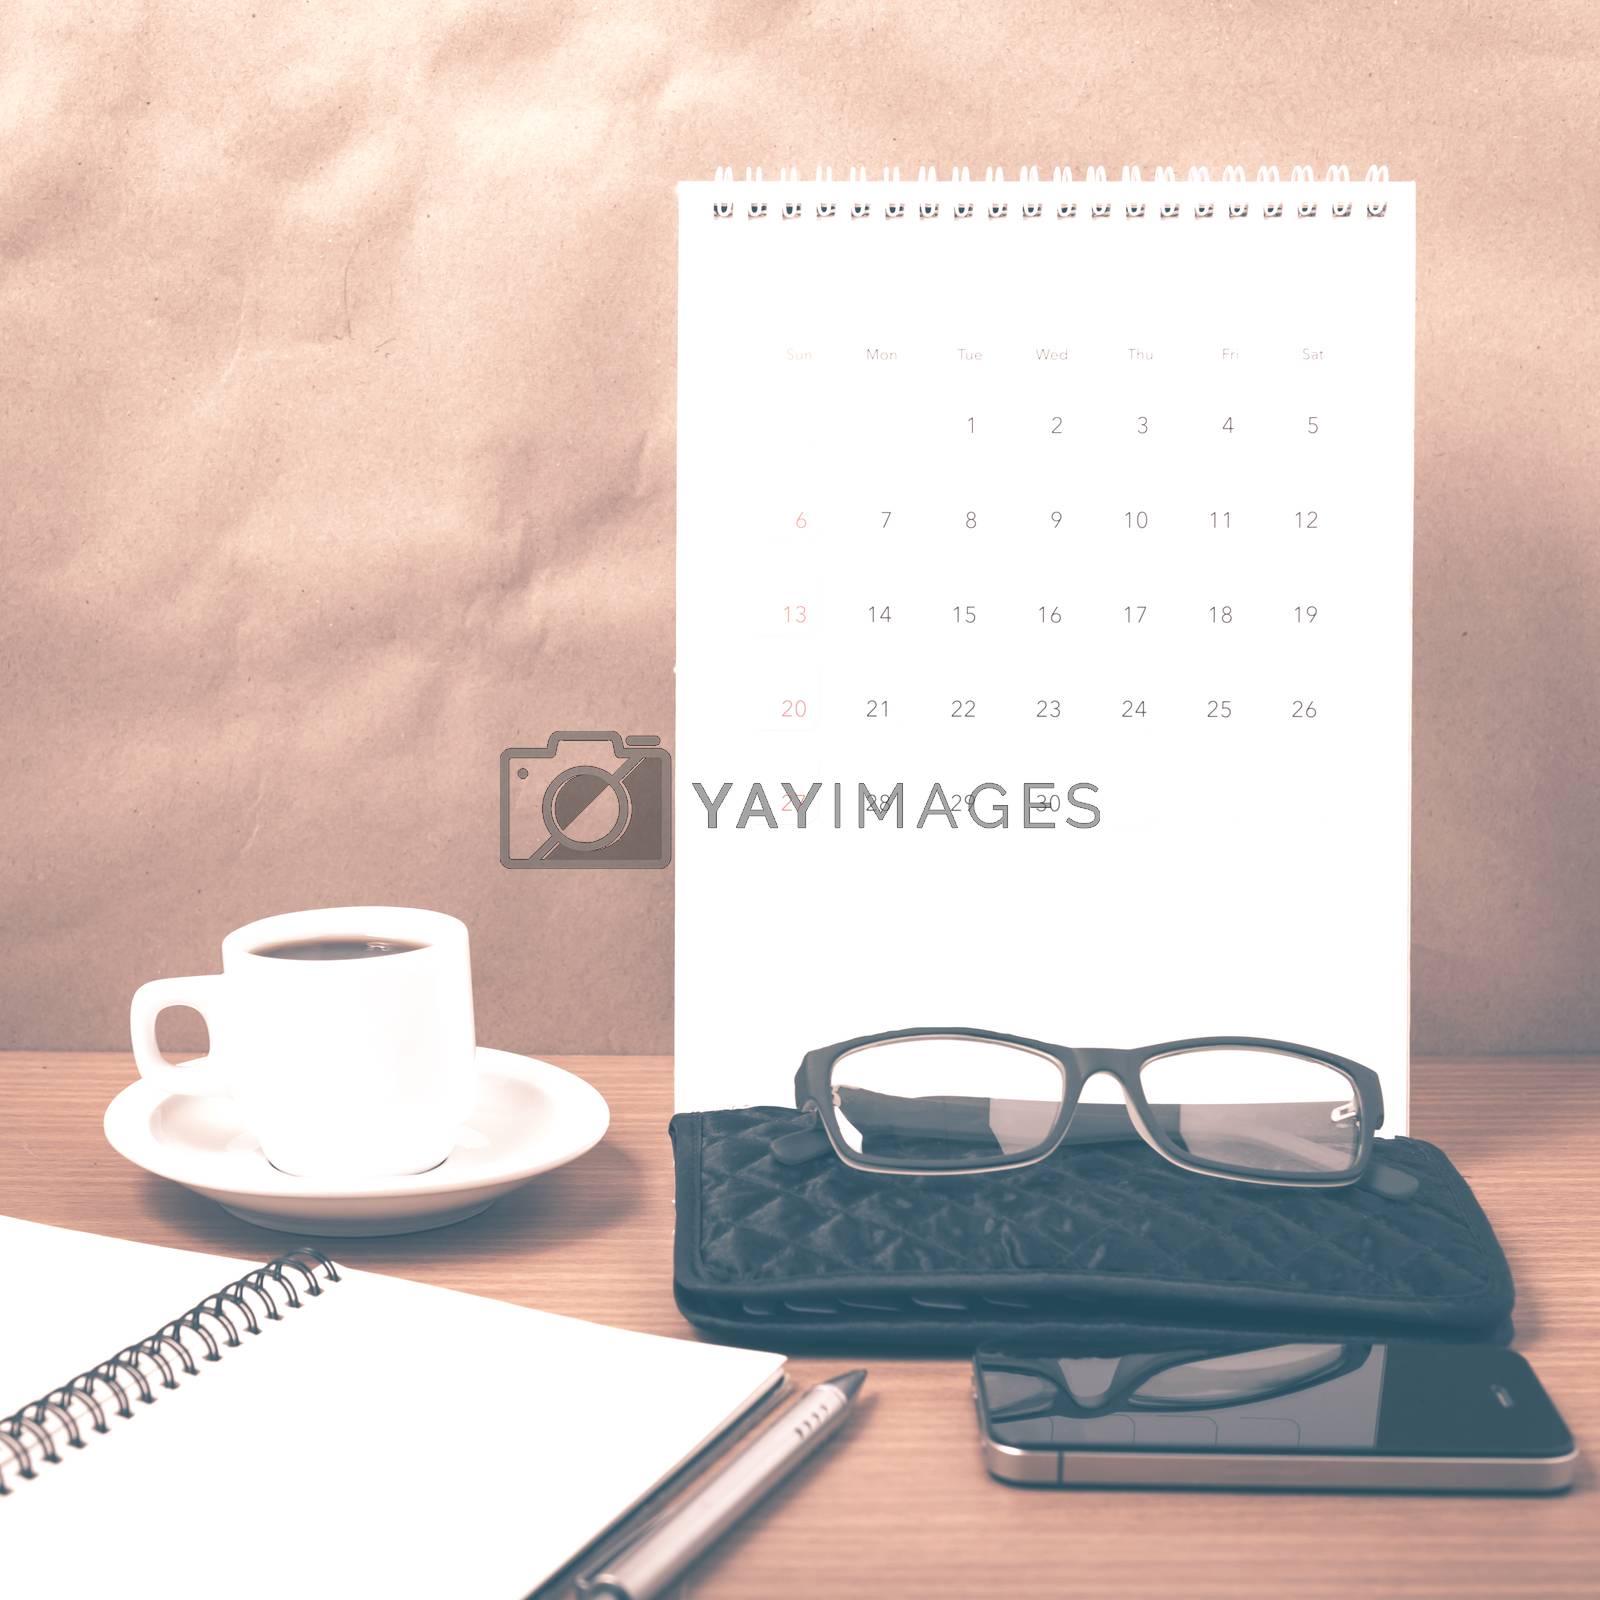 Royalty free image of office desk : coffee with phone,calendar,wallet,notepad vintage  by ammza12